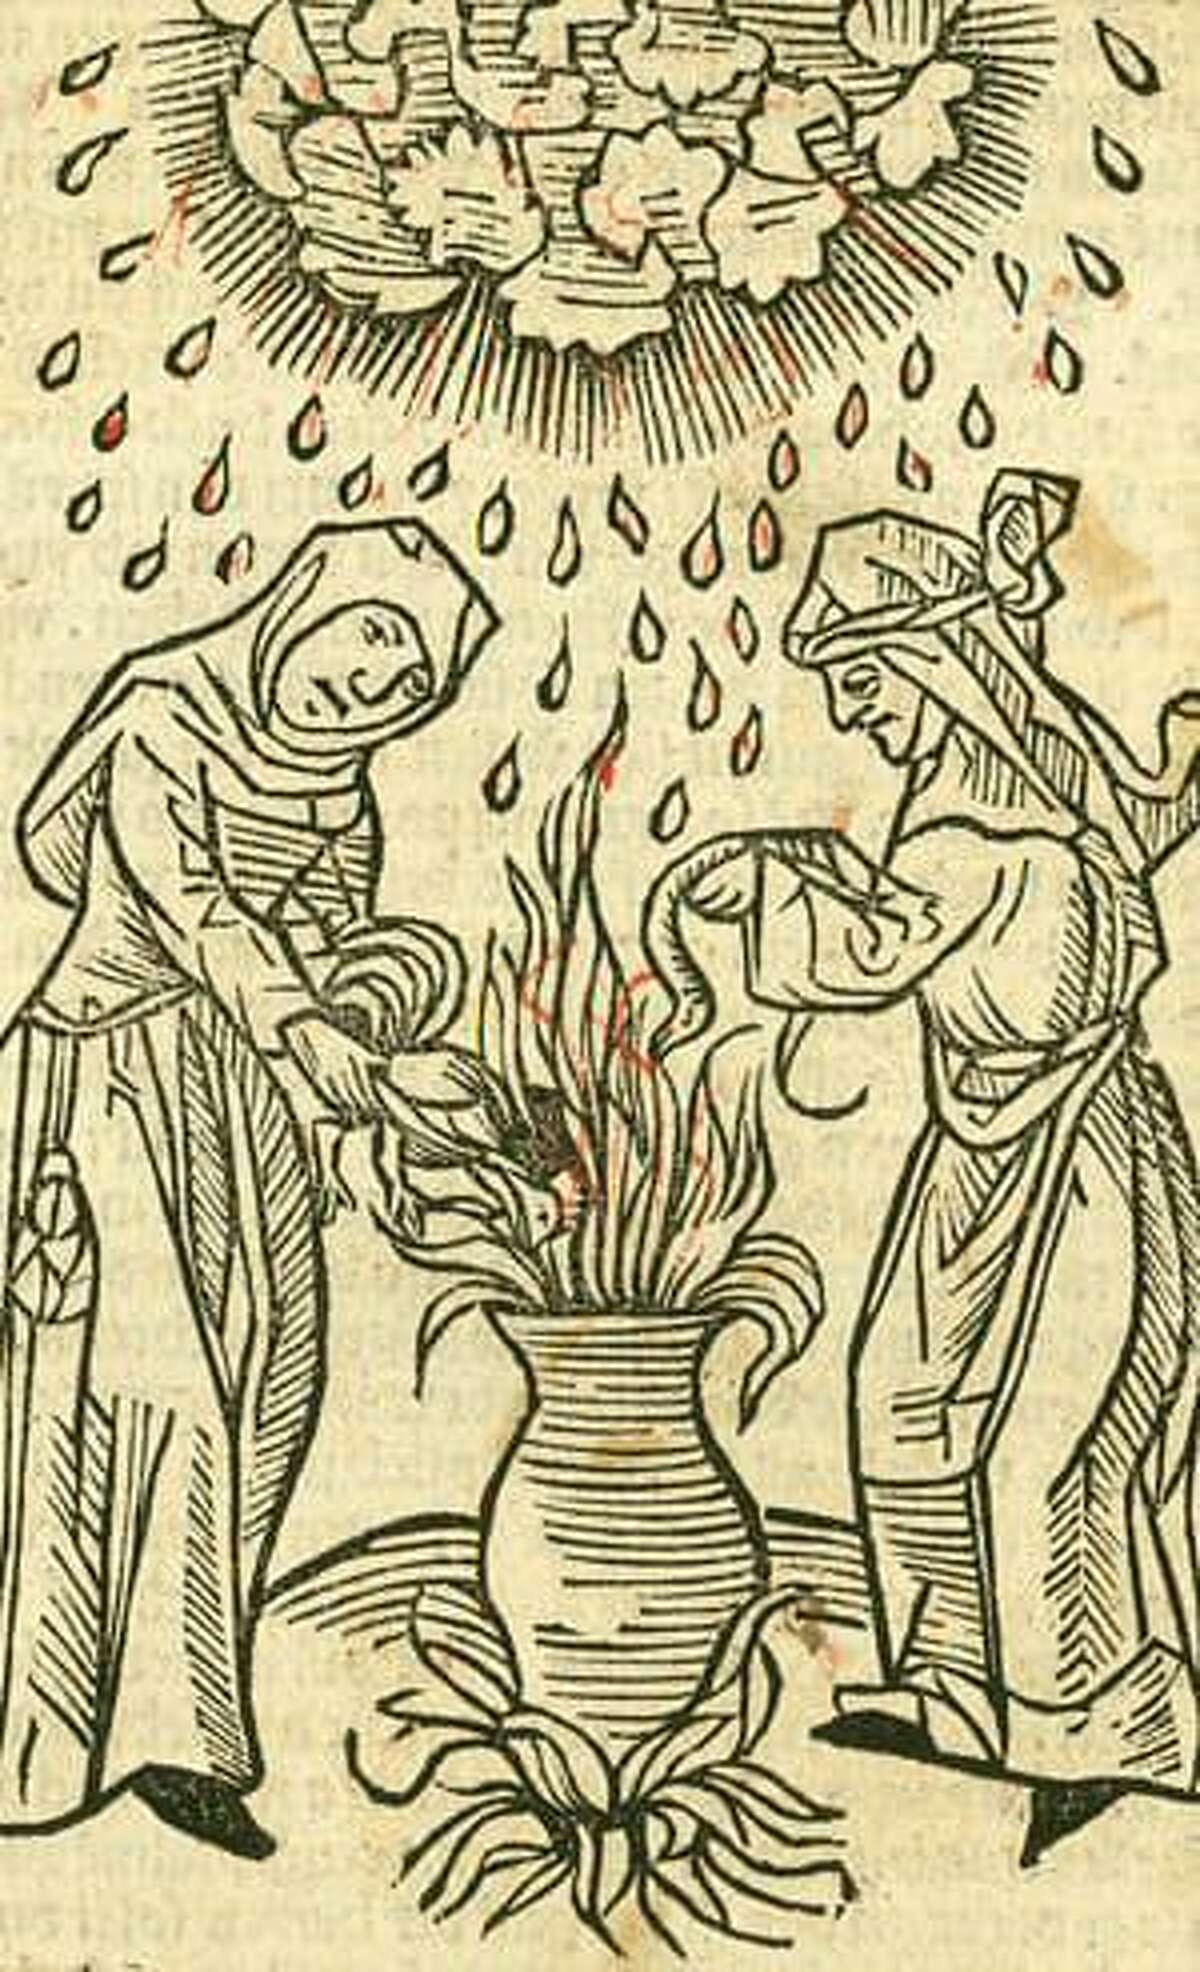 A woodcut illustration of witches casting a spell to conjure the weather by Ulrich Molitor from his 1489 treatise on witchcraft, De Lamiis et Pythonicis Mulieribus (Of Witches and Diviner Women.)